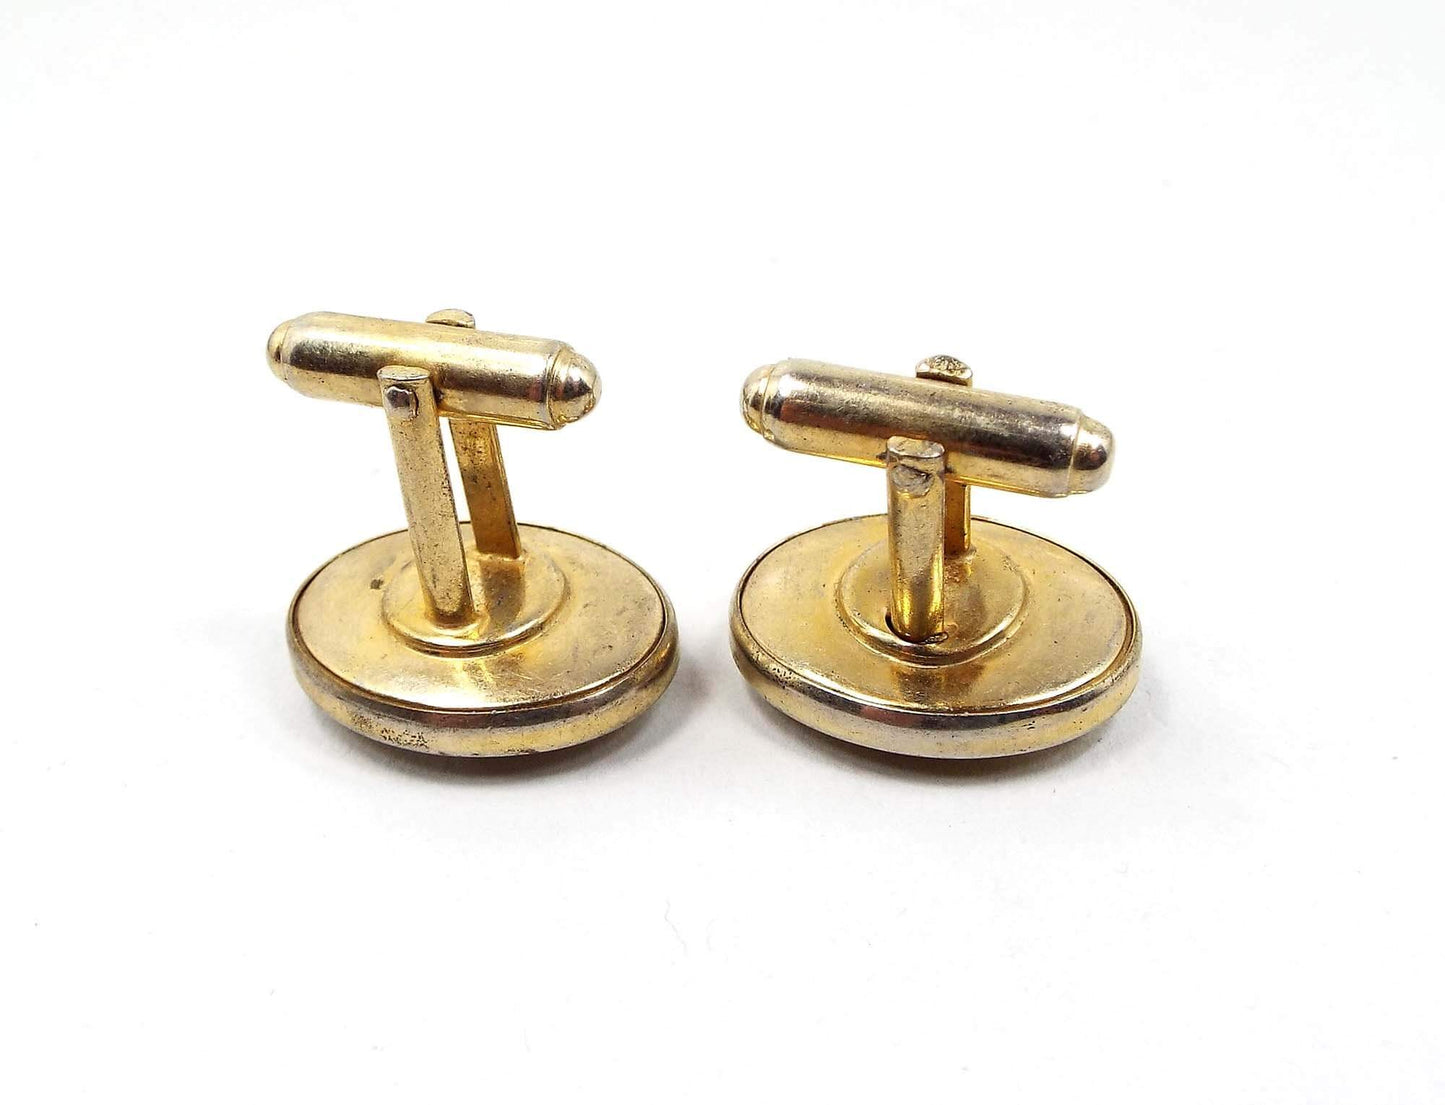 Anson Vintage Lucite RN Cufflinks, Pearly Yellow Cuff Links